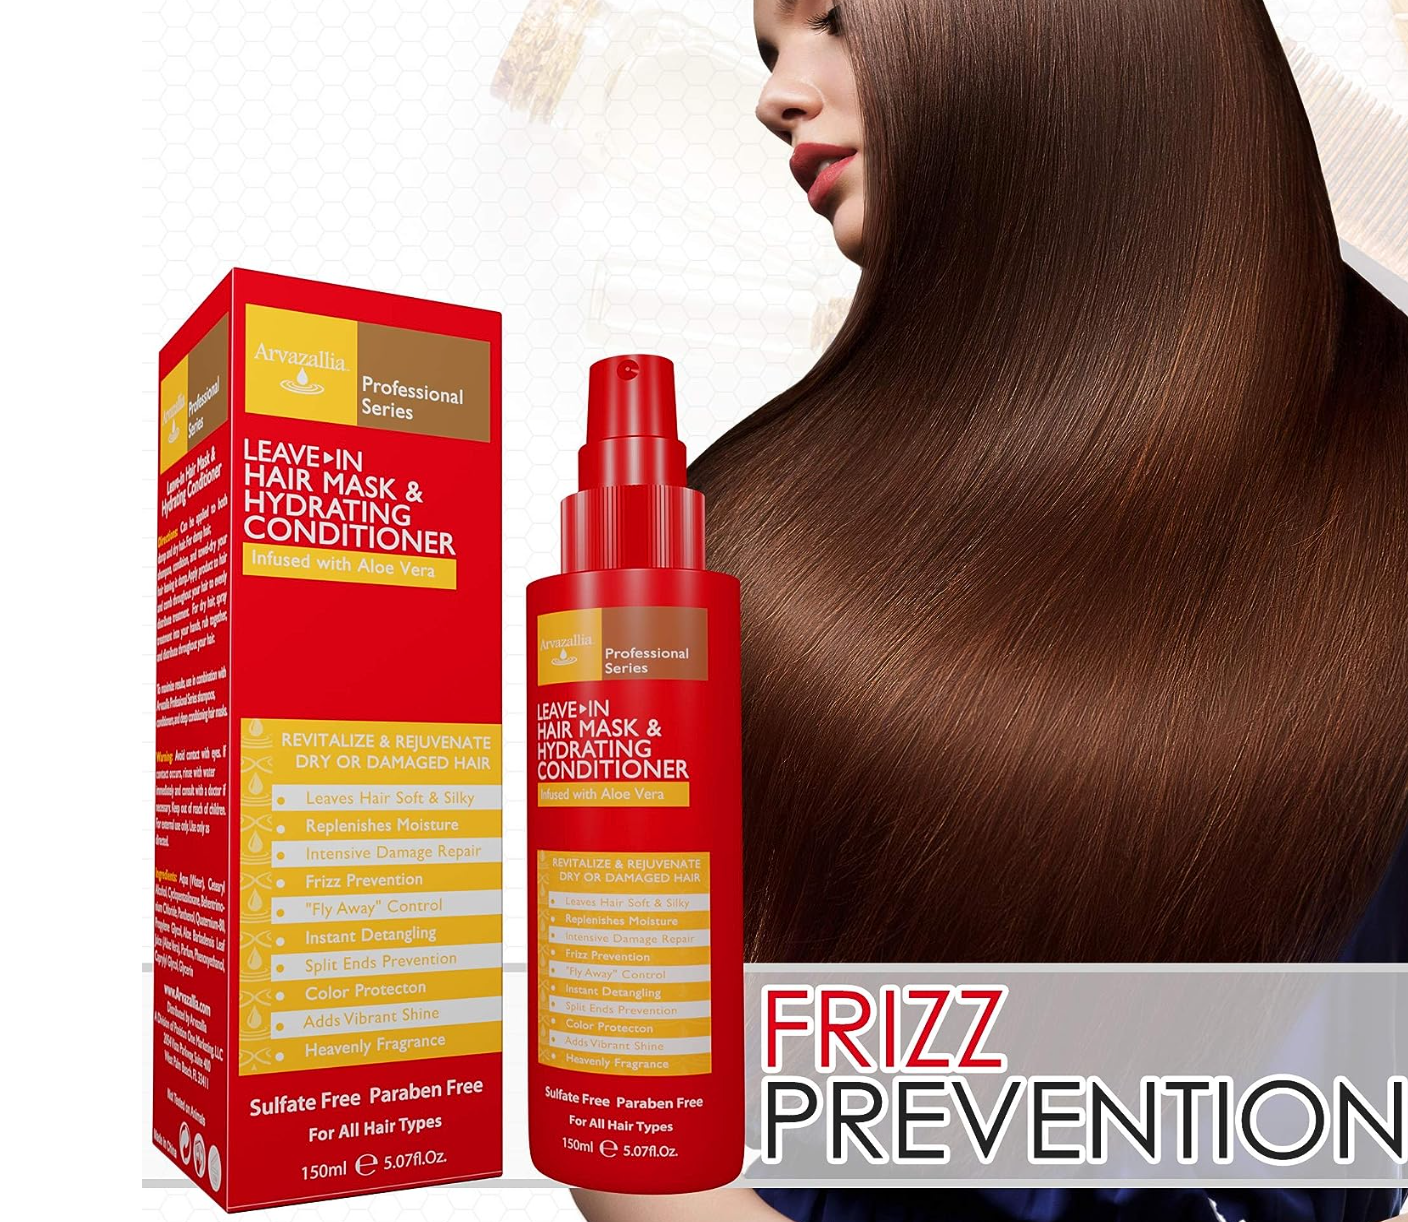 Arvazallia Leave-in Hair Mask and Hydrating Conditioner Spray for Dry or Damaged Hair - Professional Grade Leave-in Conditioner and Moisturizer